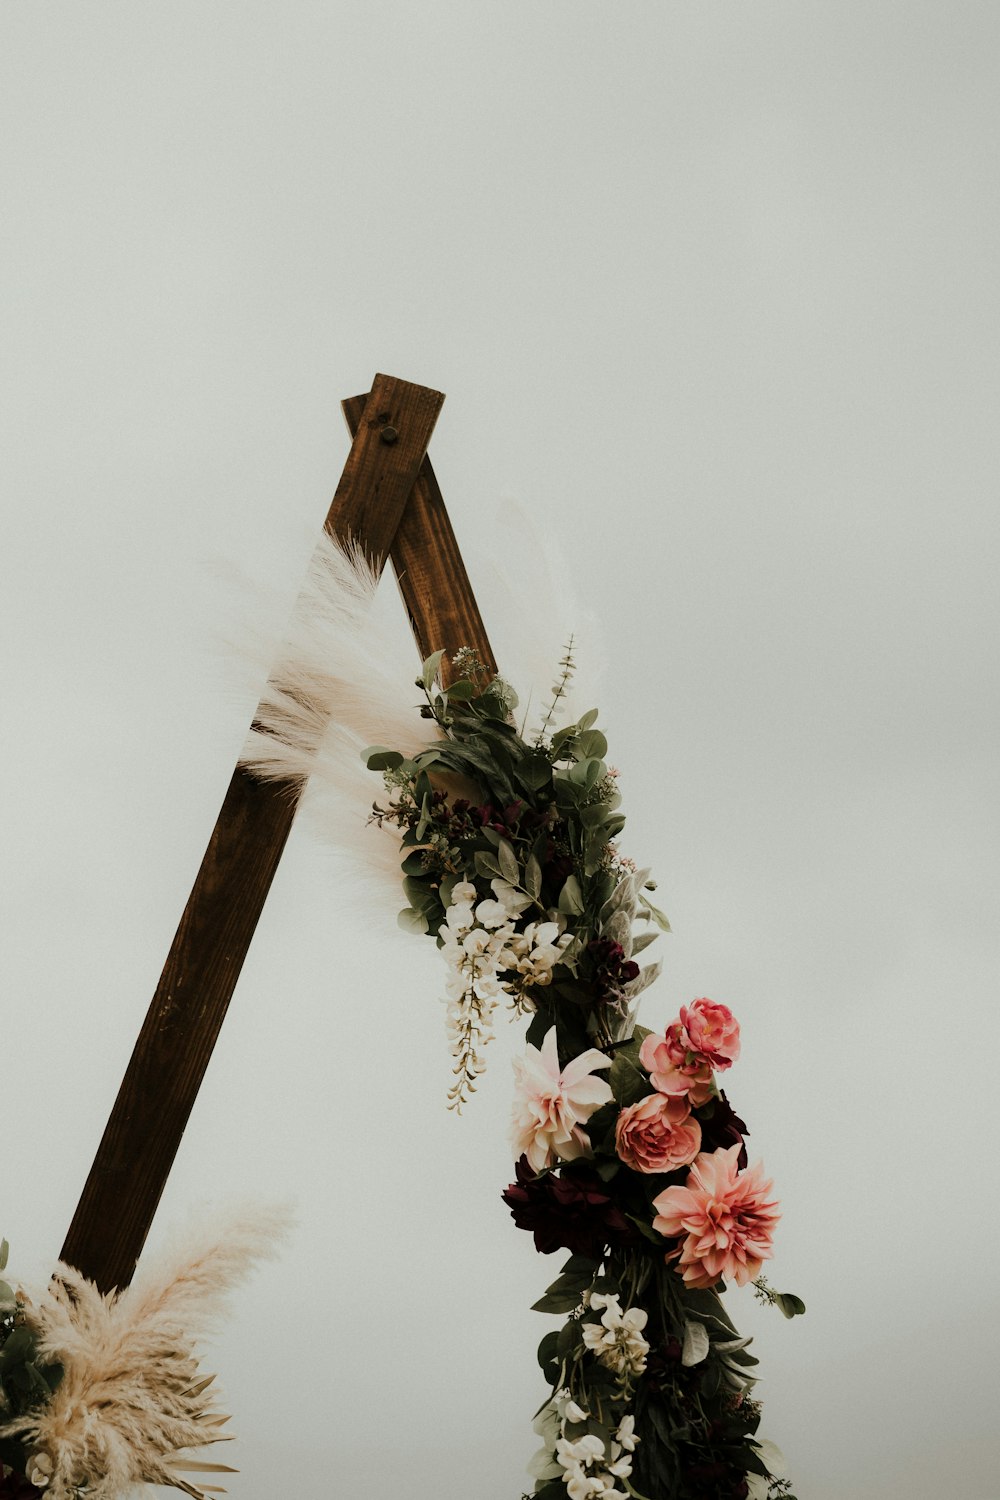 a wooden cross decorated with flowers and feathers